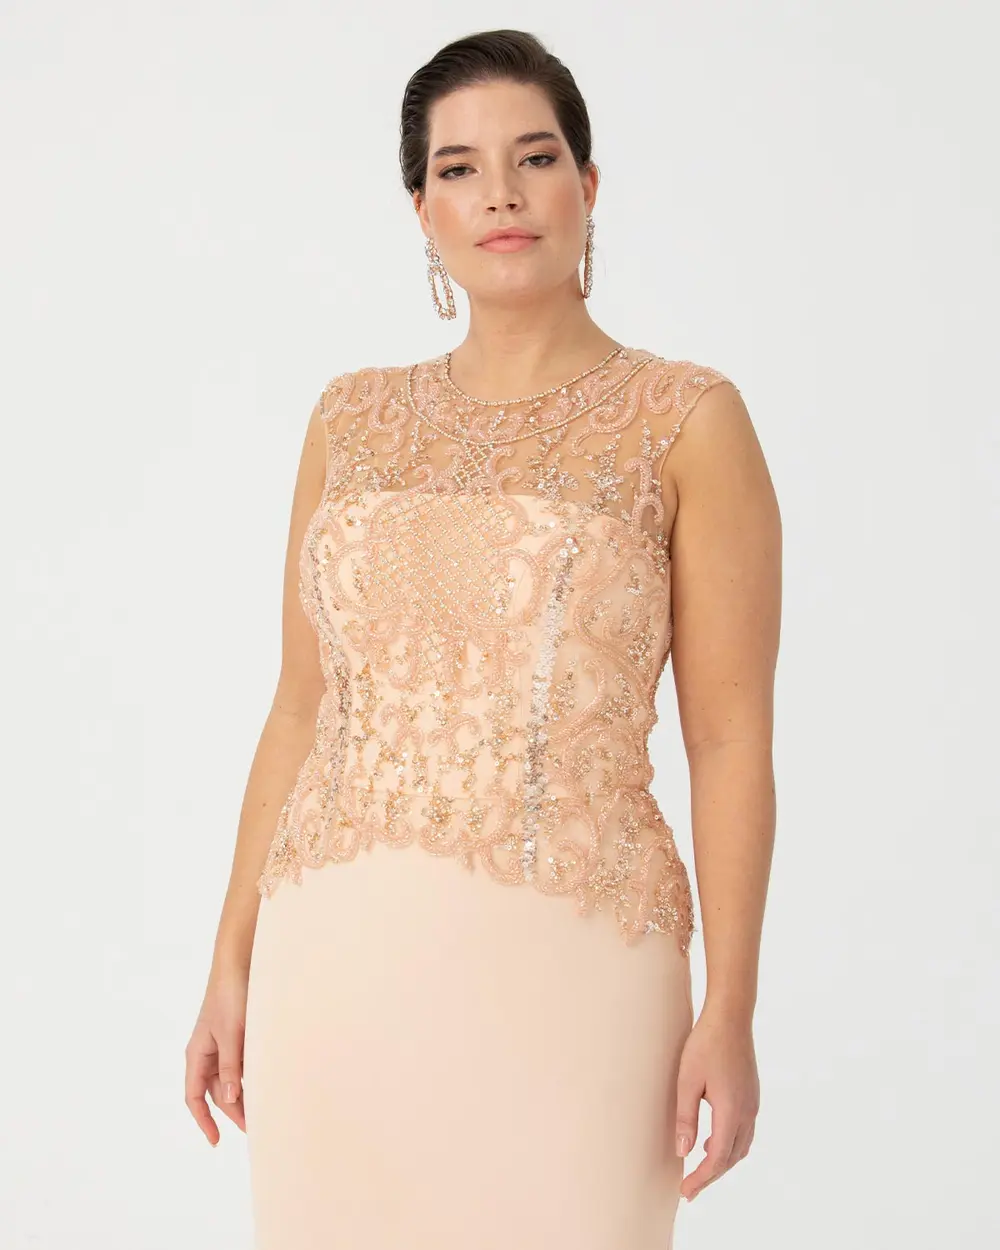 PLUS SIZE FISH FORM EMBROIDERED EVENING DRESS